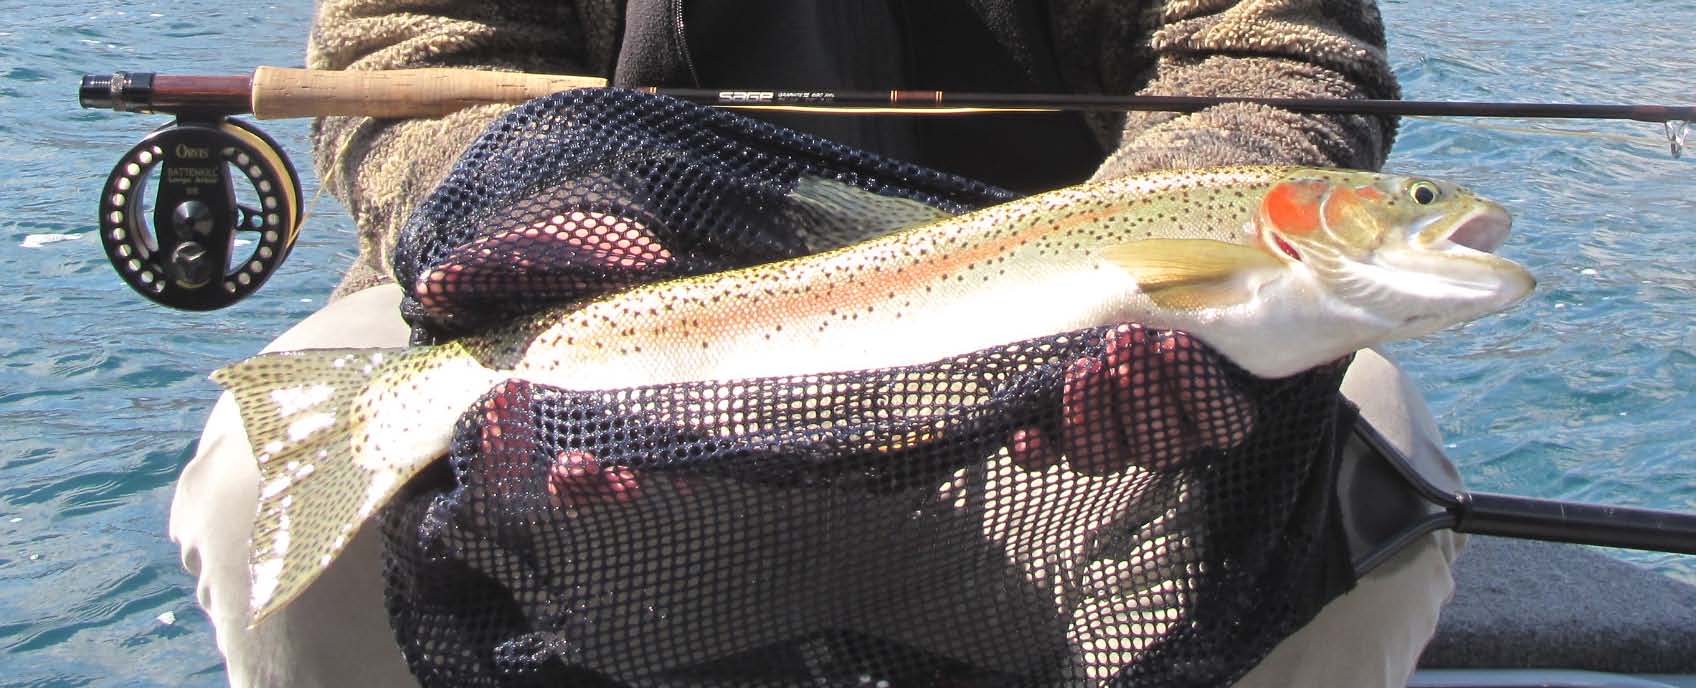 Professional Fly Fishing Guide Service In Central New York